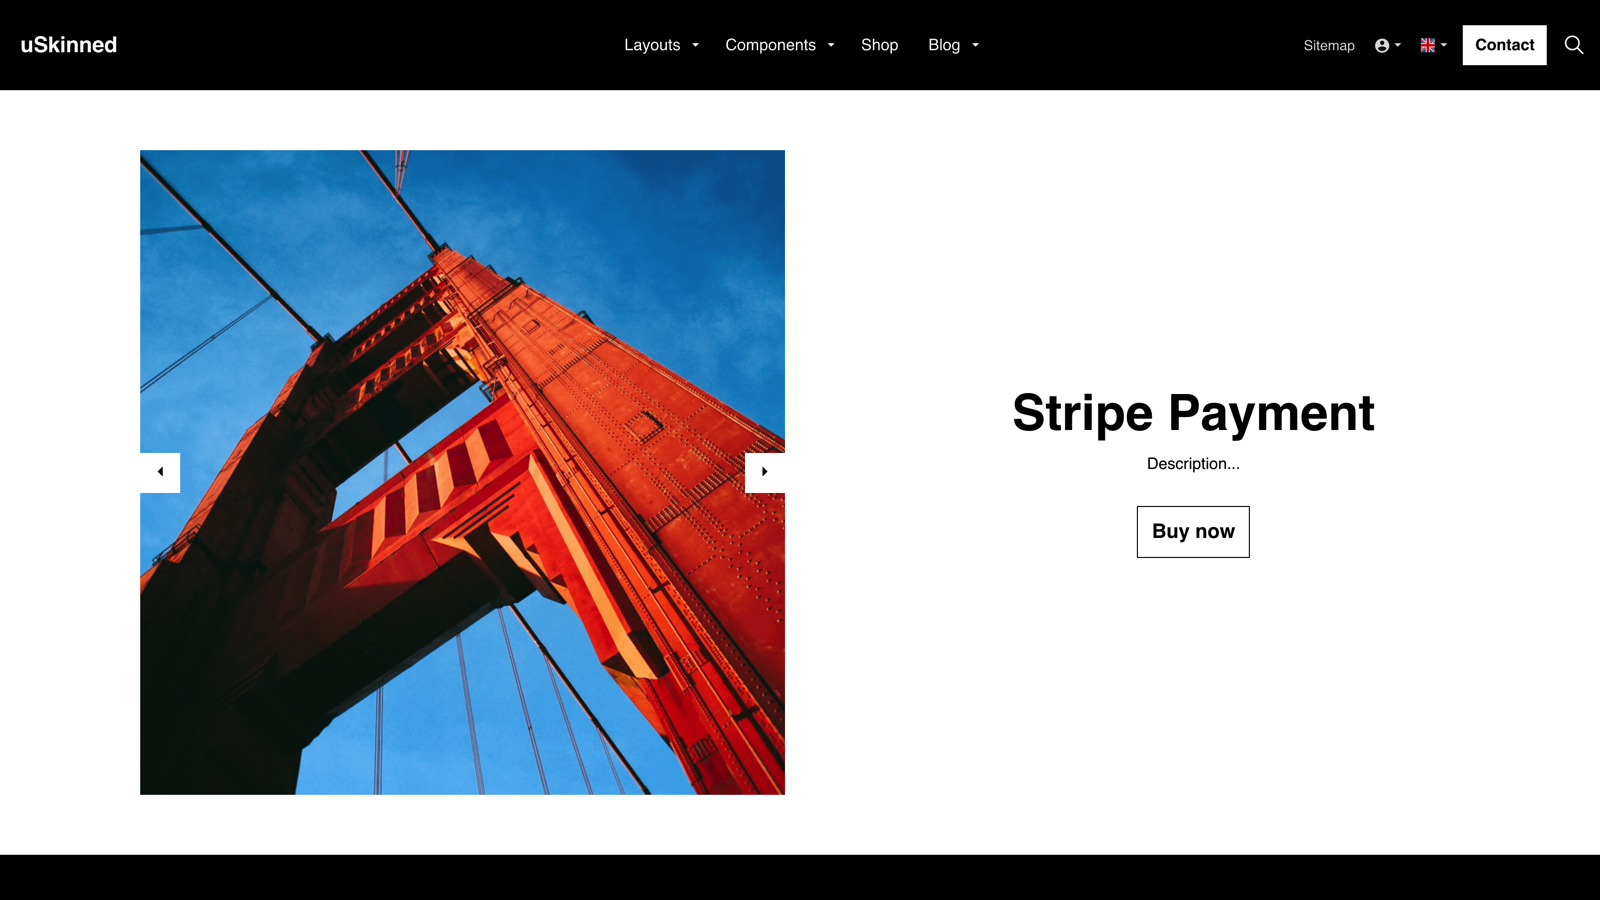 Stripe Payment link product visible to customers.